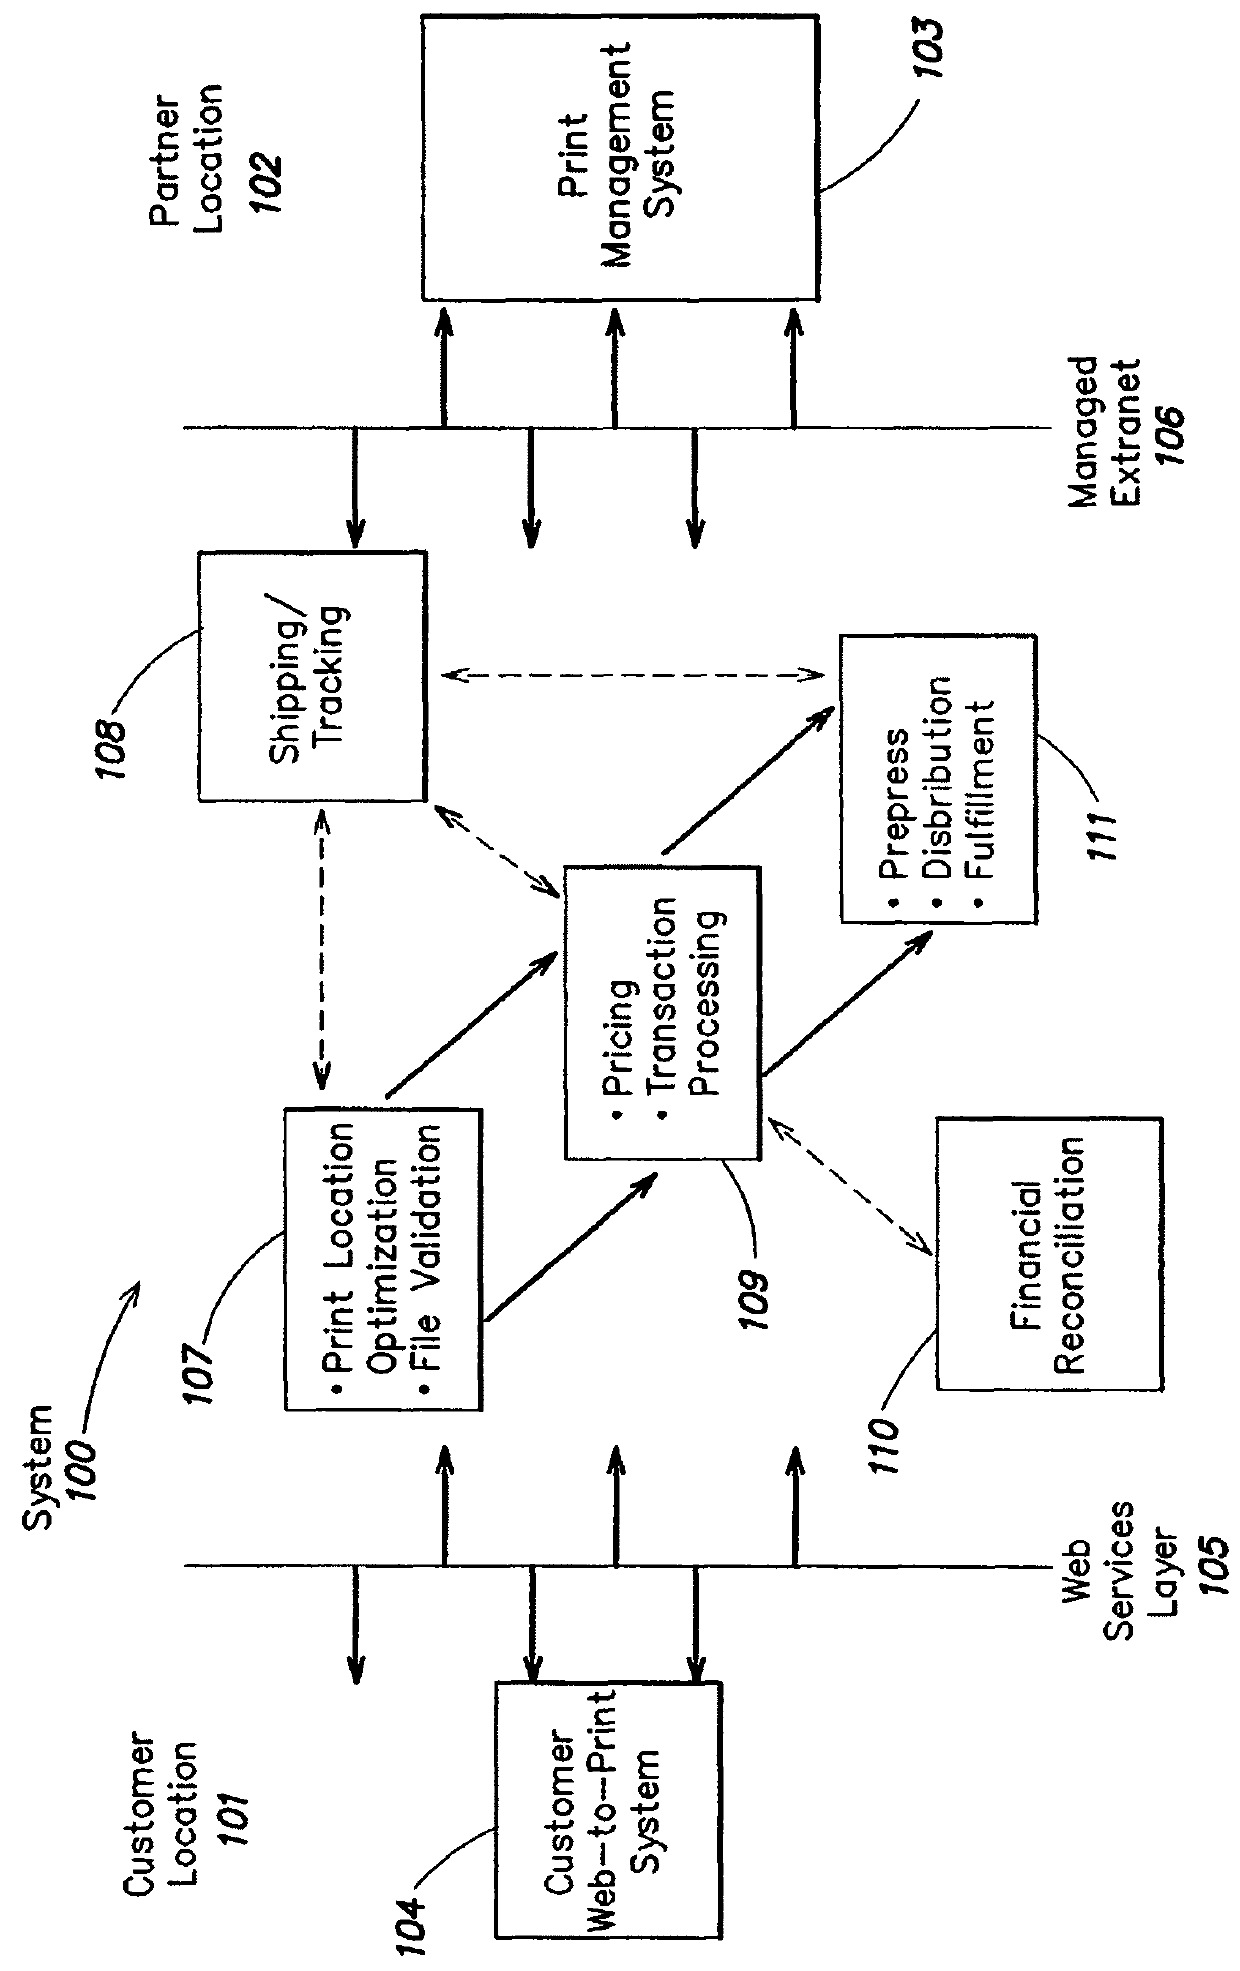 Method and apparatus for printing in a distributed communications network